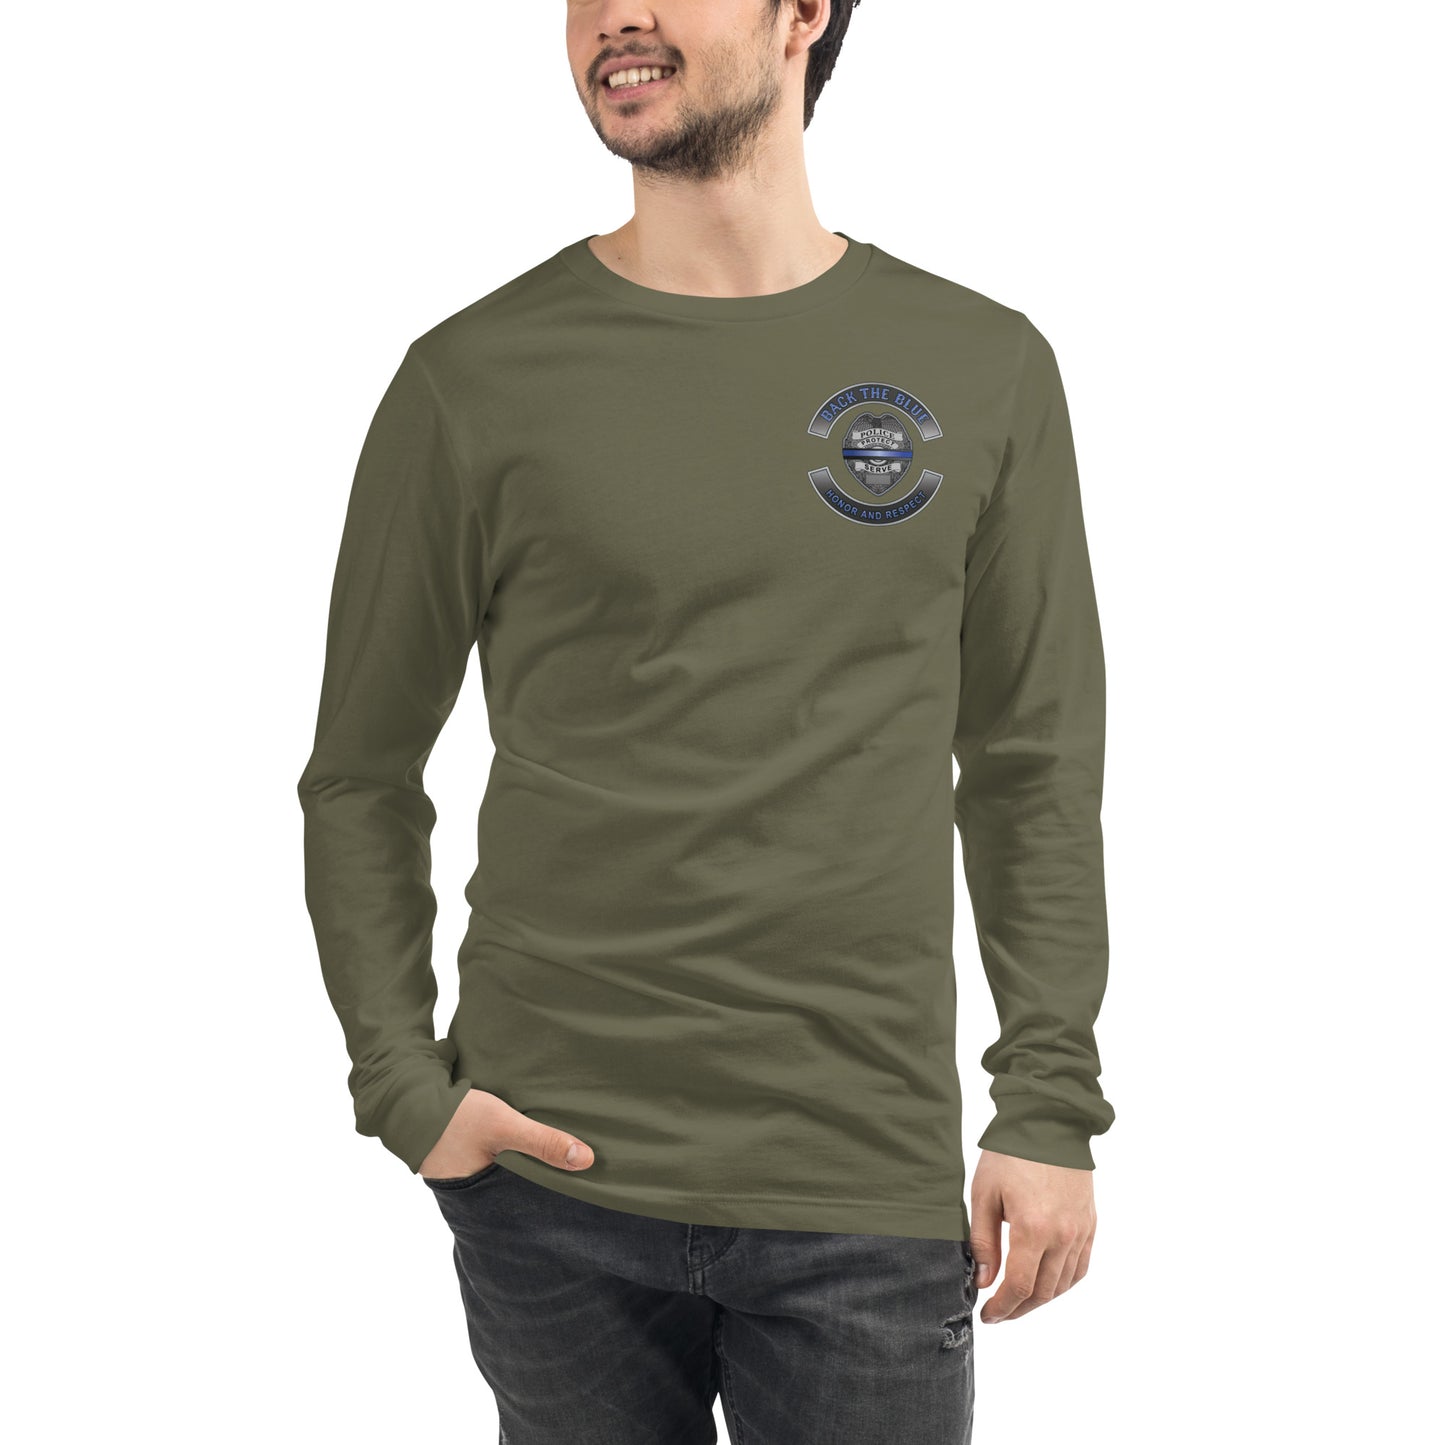 Back The Blue Honor and Respect Thin Blue Line Bella Canvas  Long Sleeve Tee